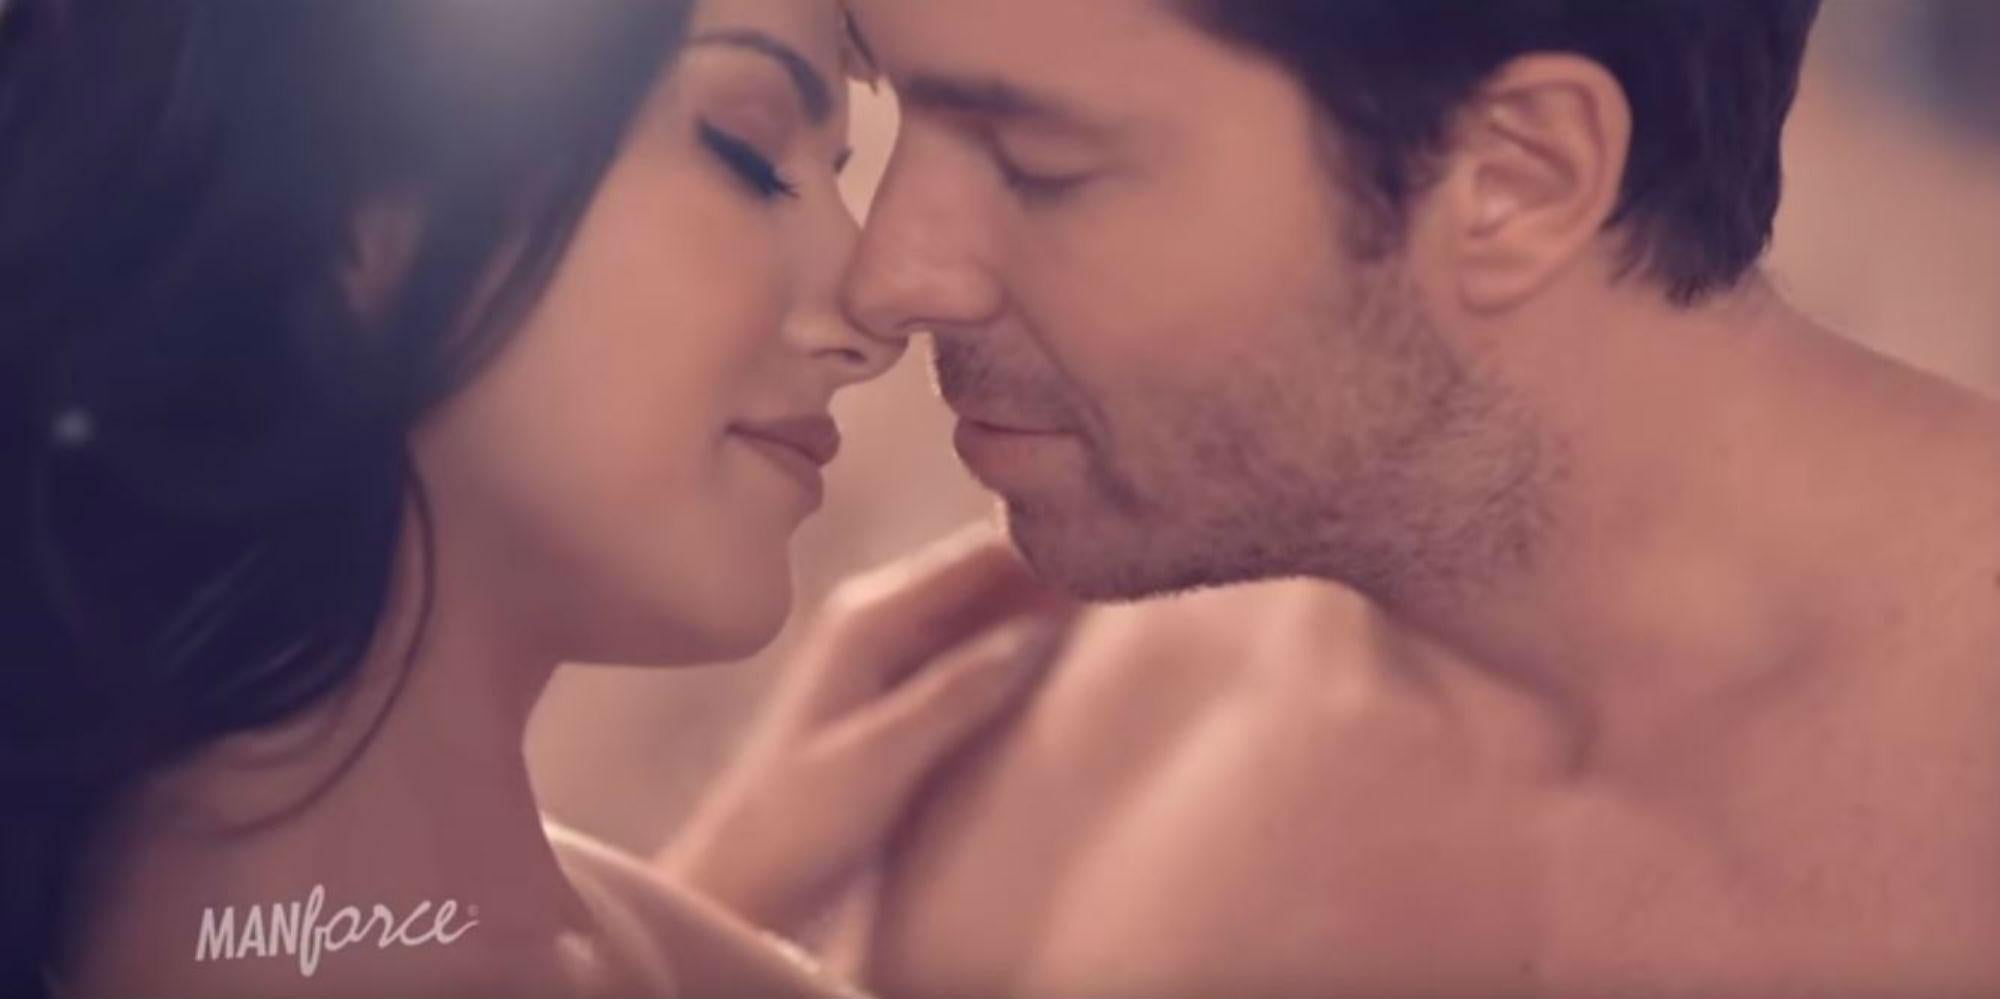 Indian Porn Condom - A condom advert featuring an ex porn star is causing fury in ...